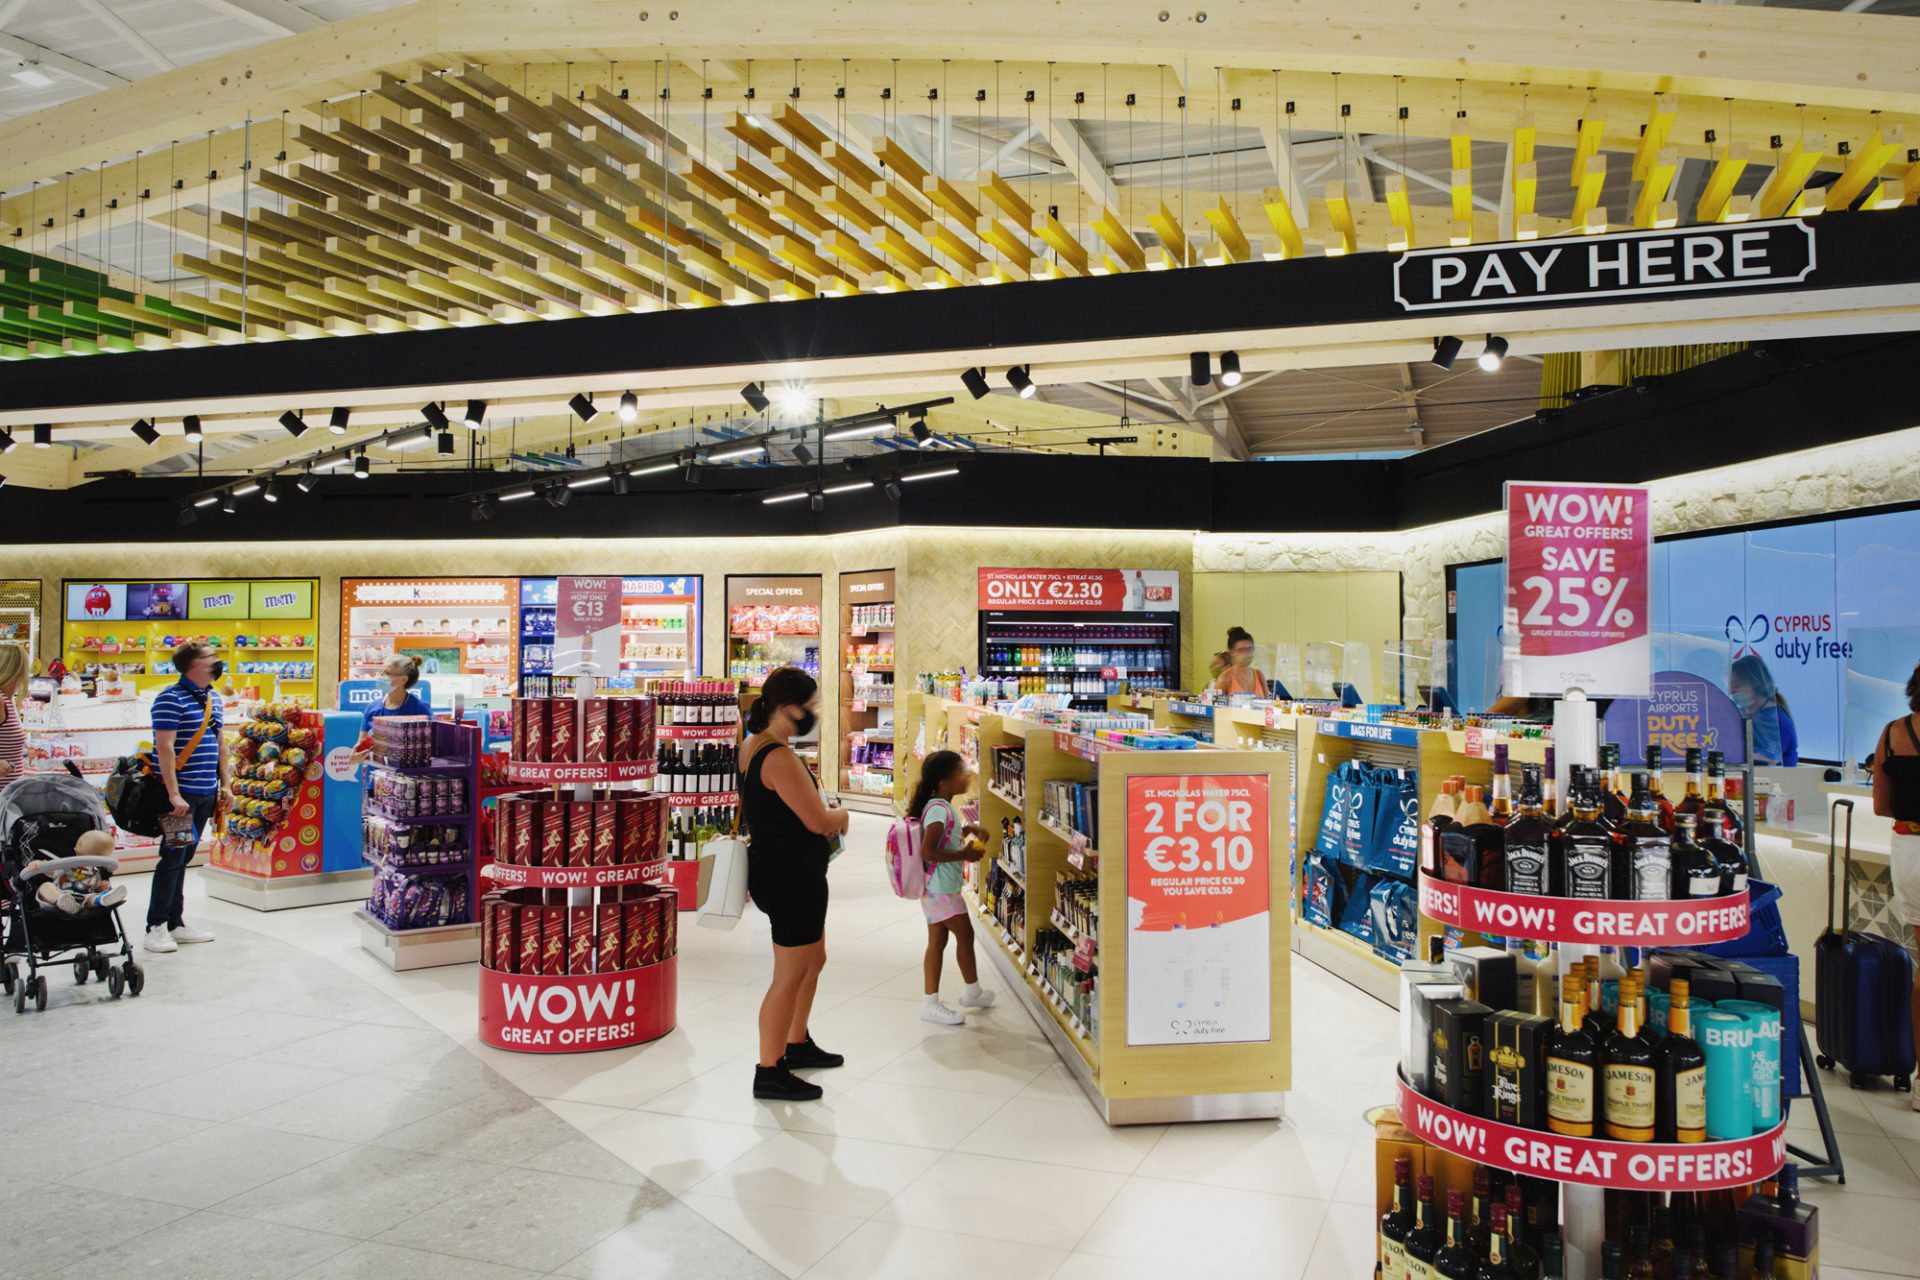 Cyprus airport POS design and strategy